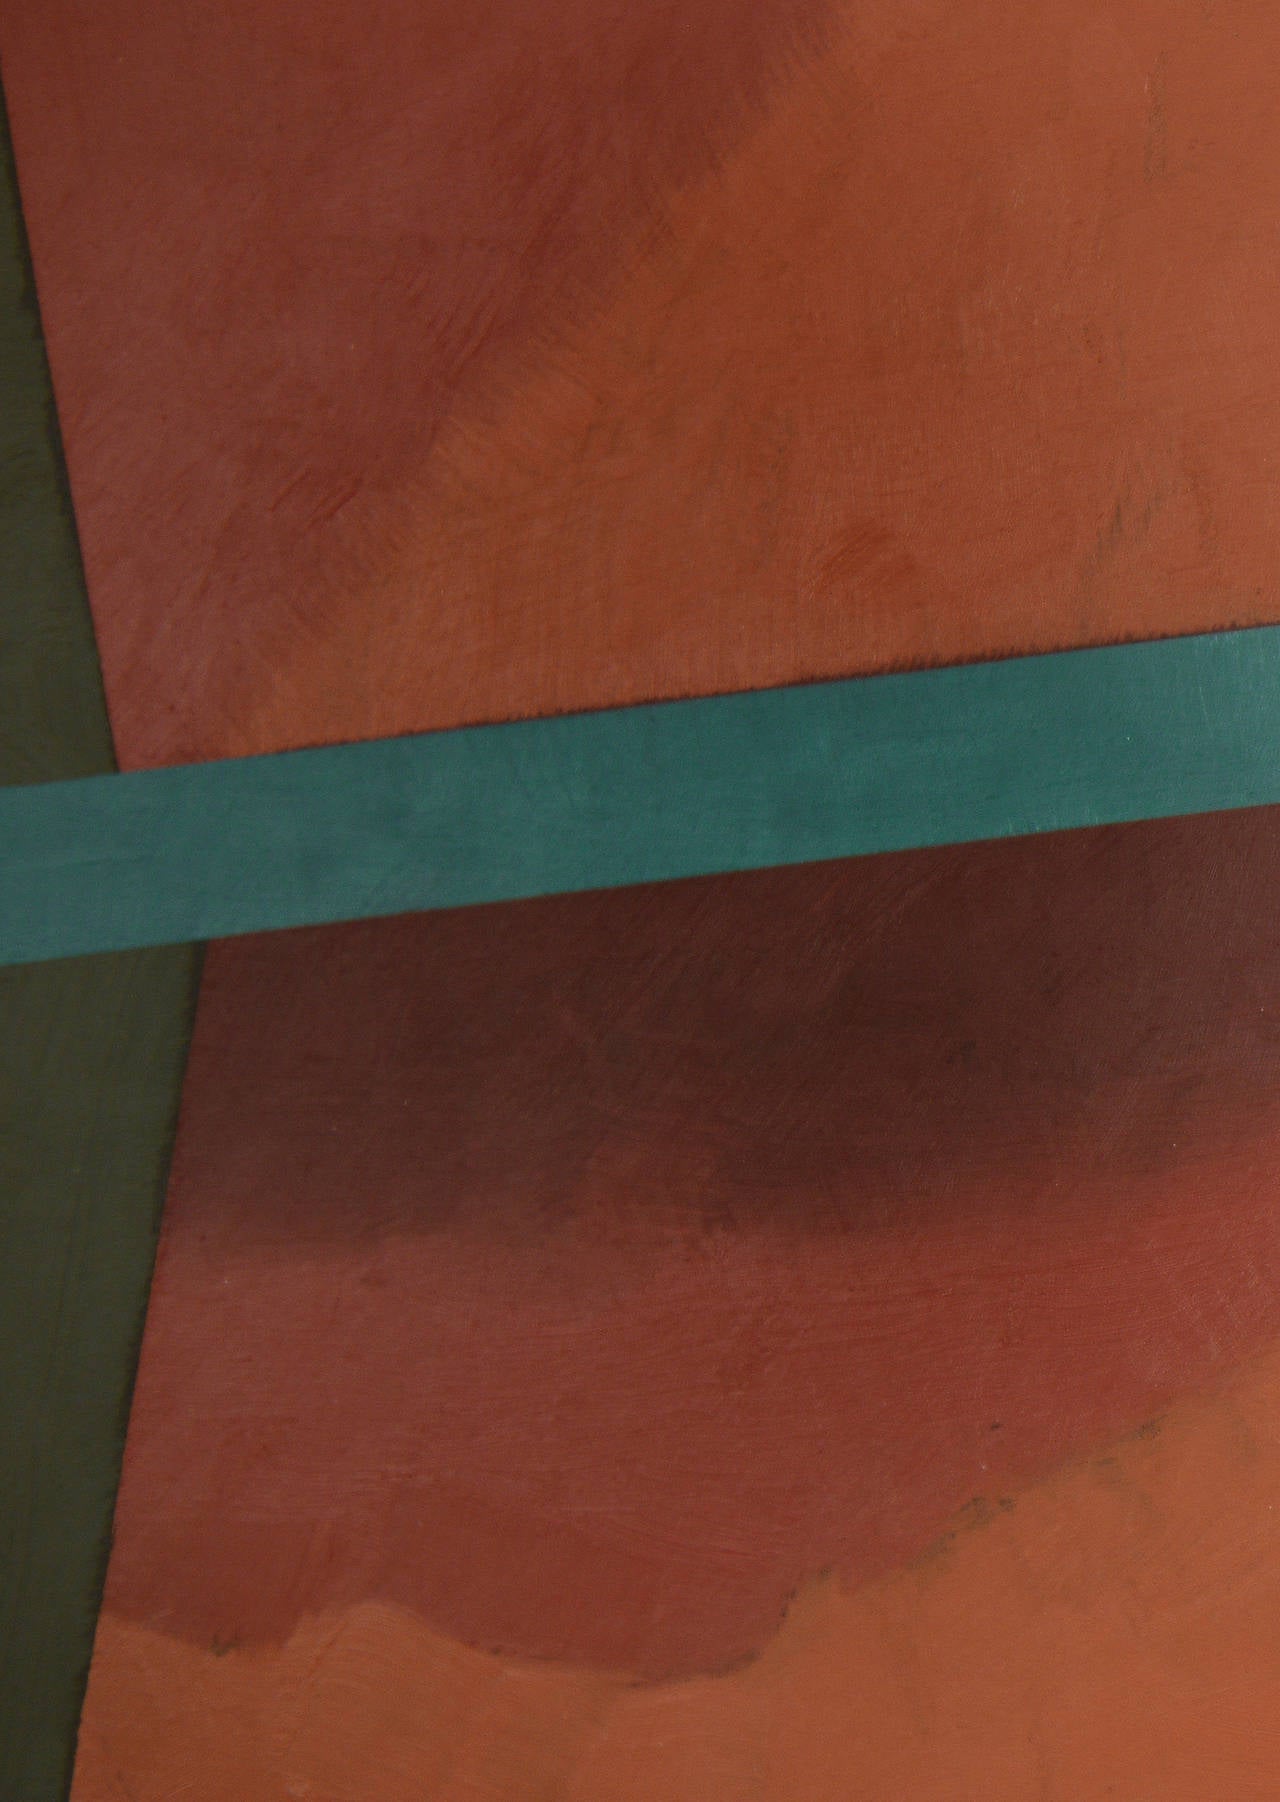 Variant on the Simple - Abstract Geometric Painting by Willard Lustenader